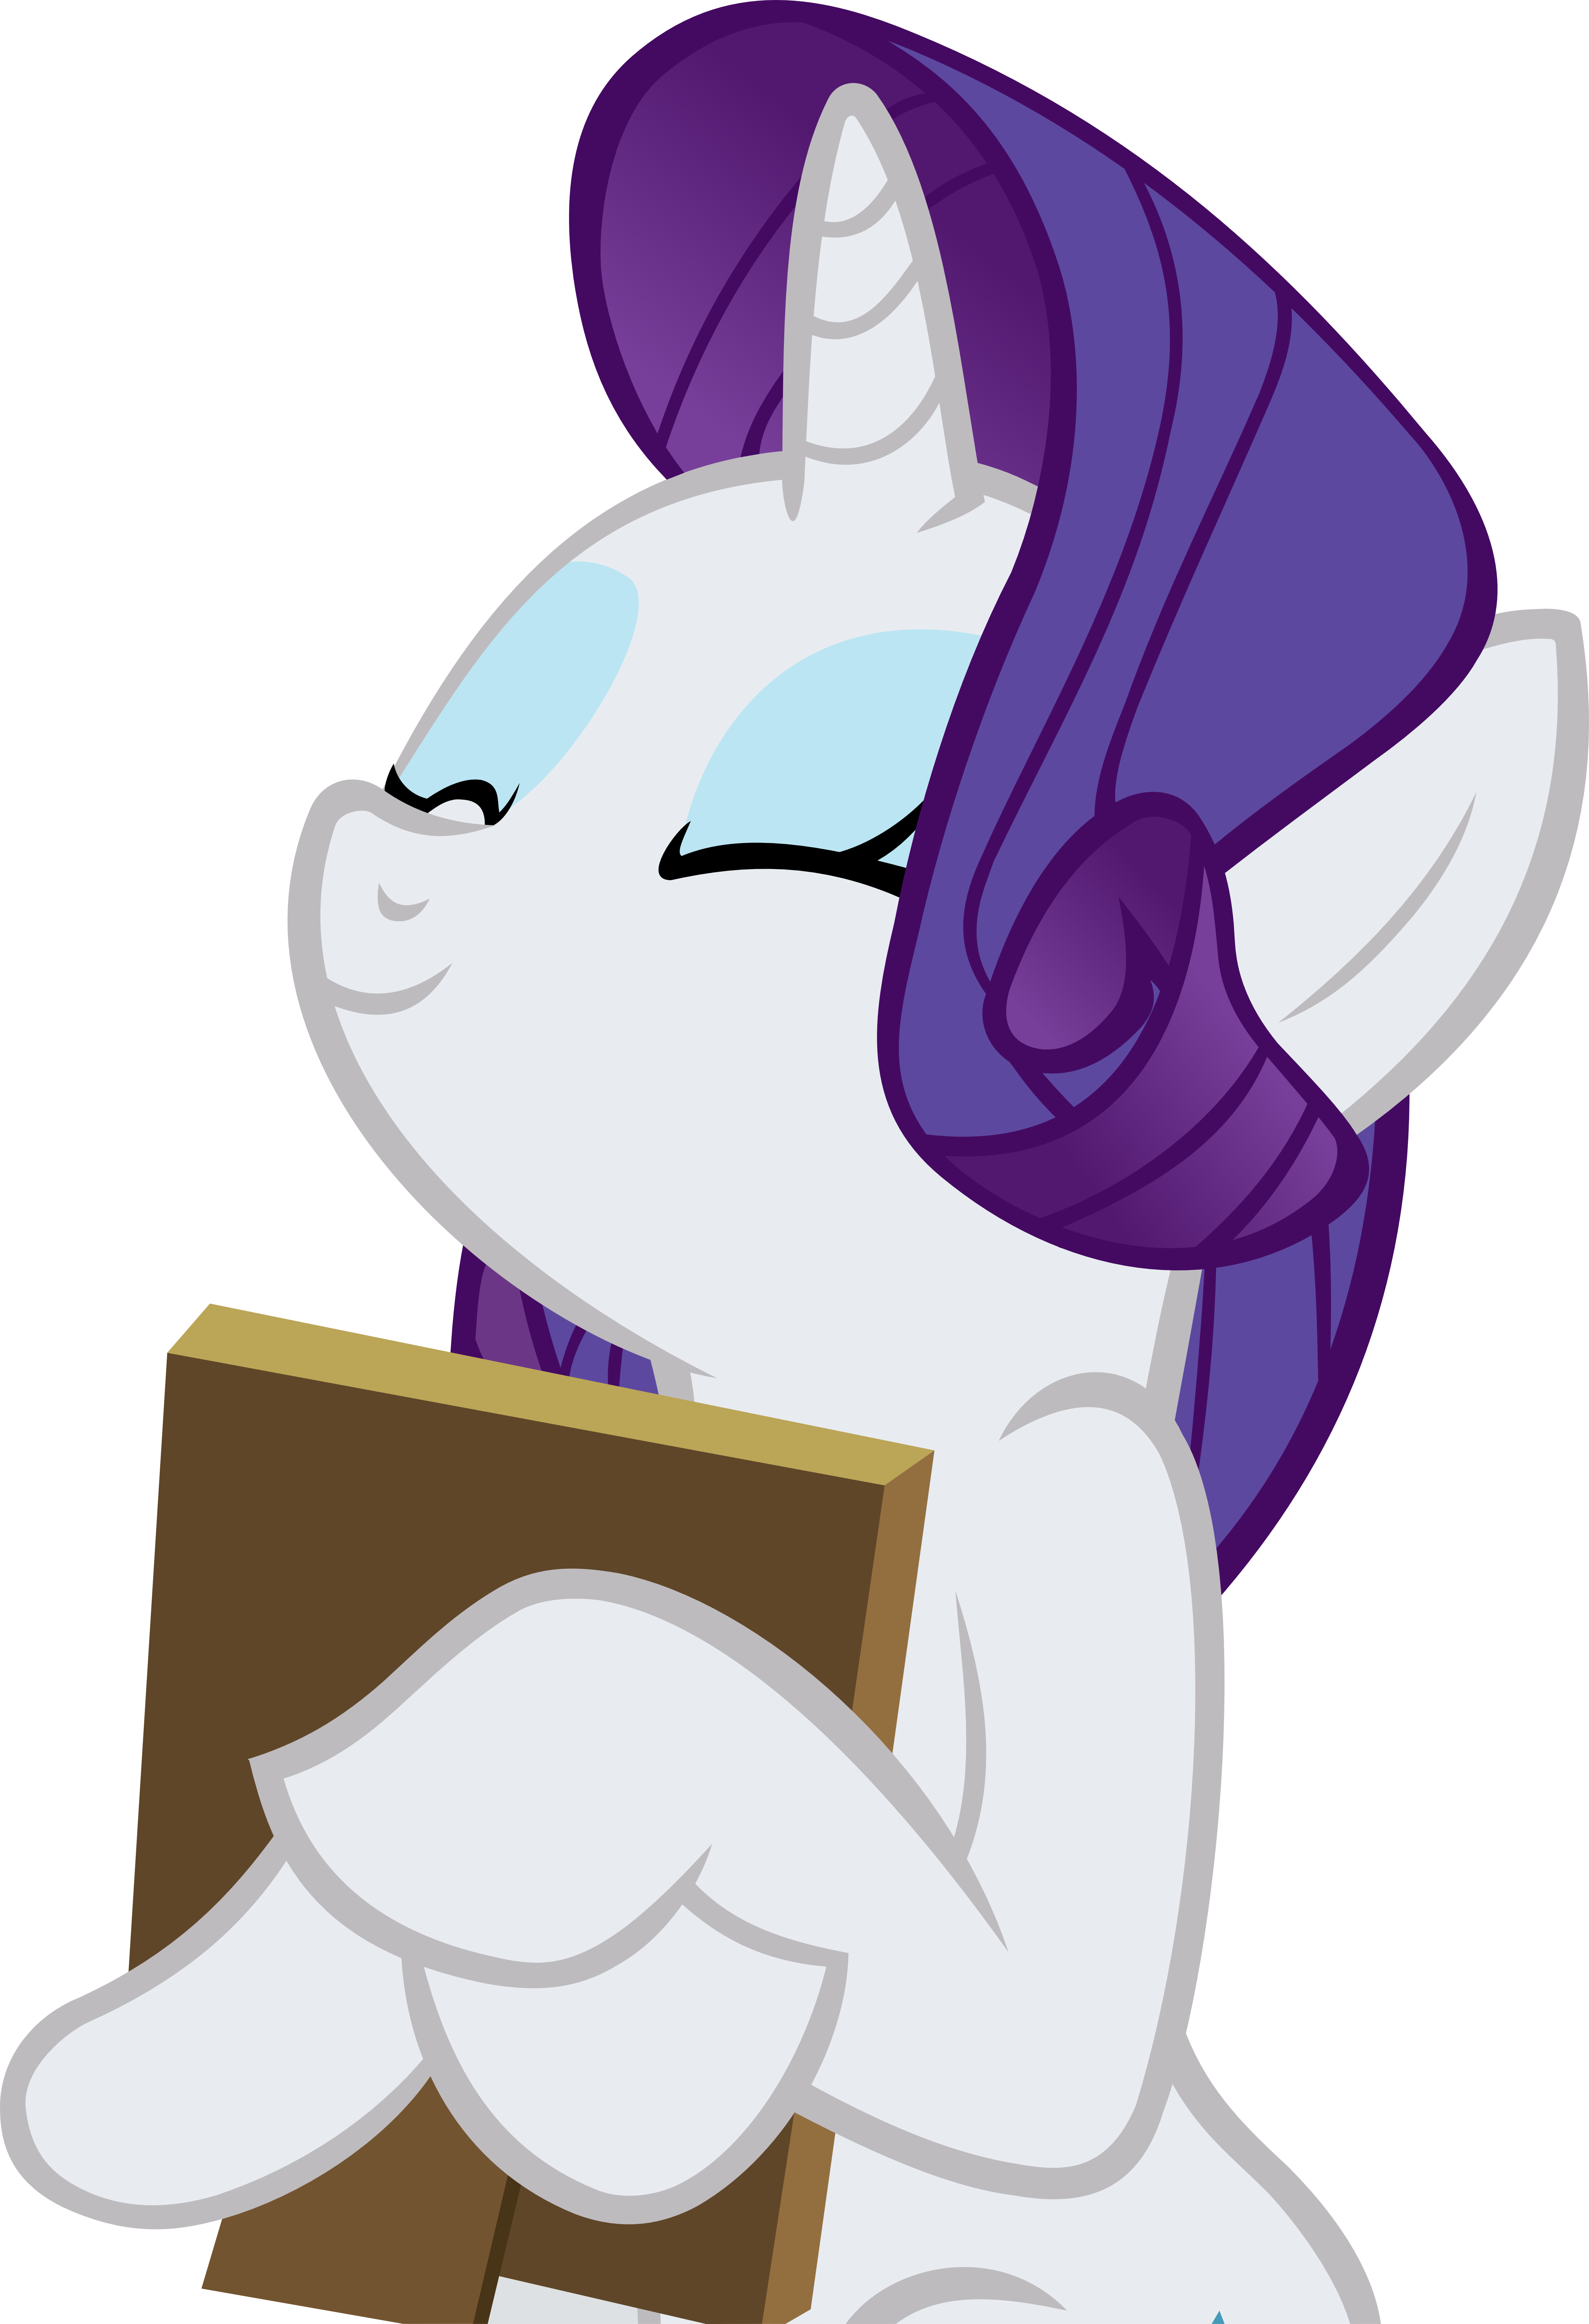 rarity_hugs_a_picture_by_ironm17-dbg22xp